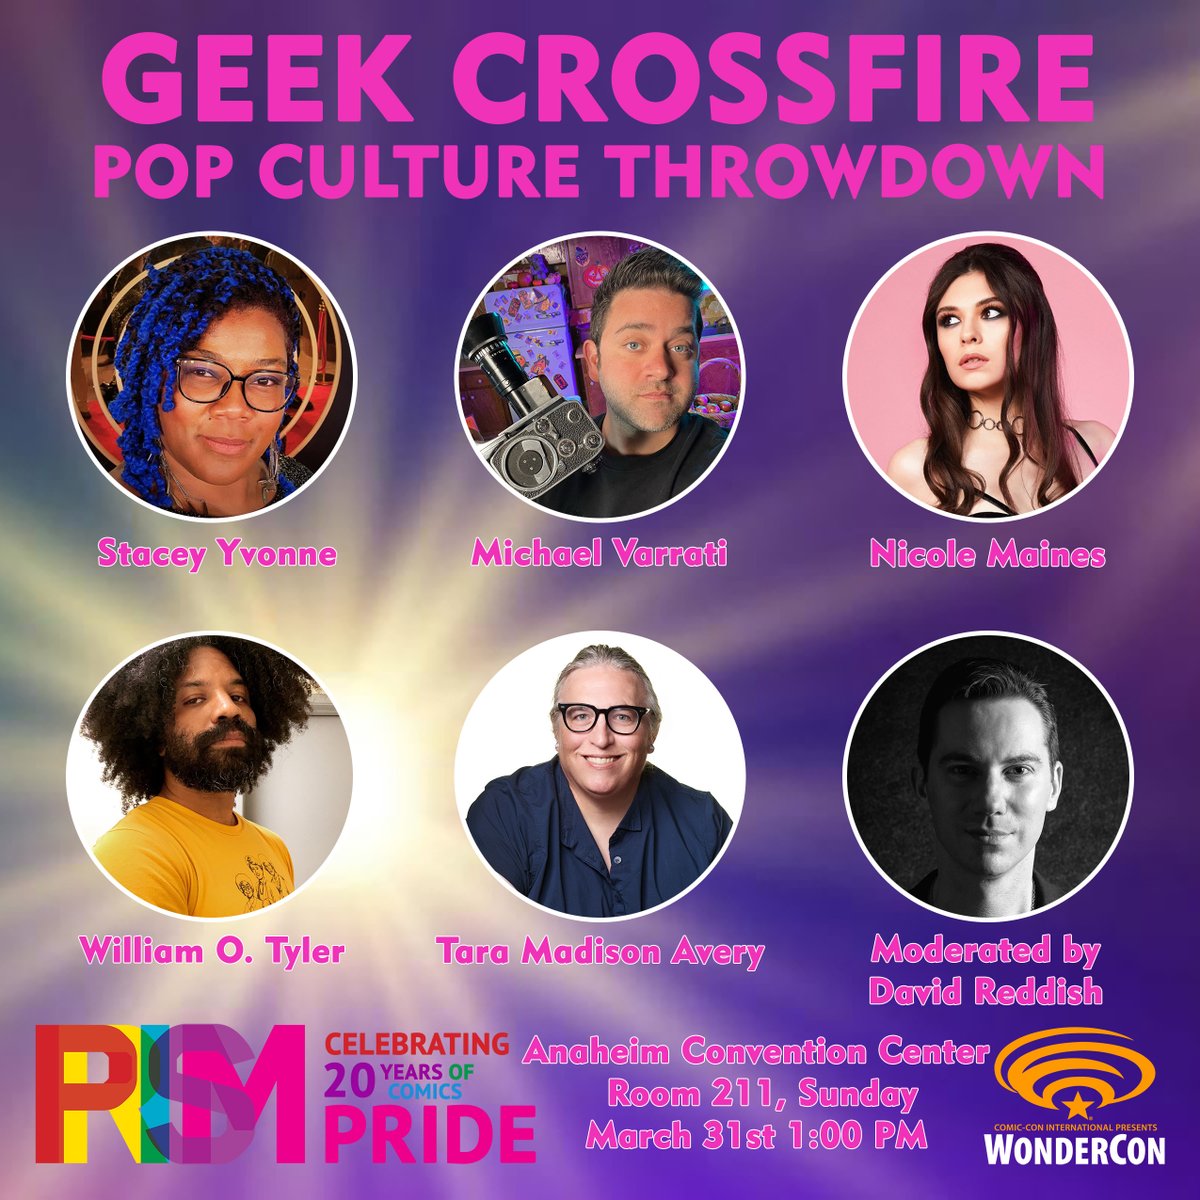 Don't miss Geek Crossfire: Pop Culture Throwdown Sunday March 31 at 1 PM at @WonderCon! See @StickyKeys, @MichaelVarrati, @NicoleAMaines, @WilliamOTyler, @TaraMAvery, and @TheGayMagneto give the hottest takes on all the TV, movies, and comics queer geeks love!